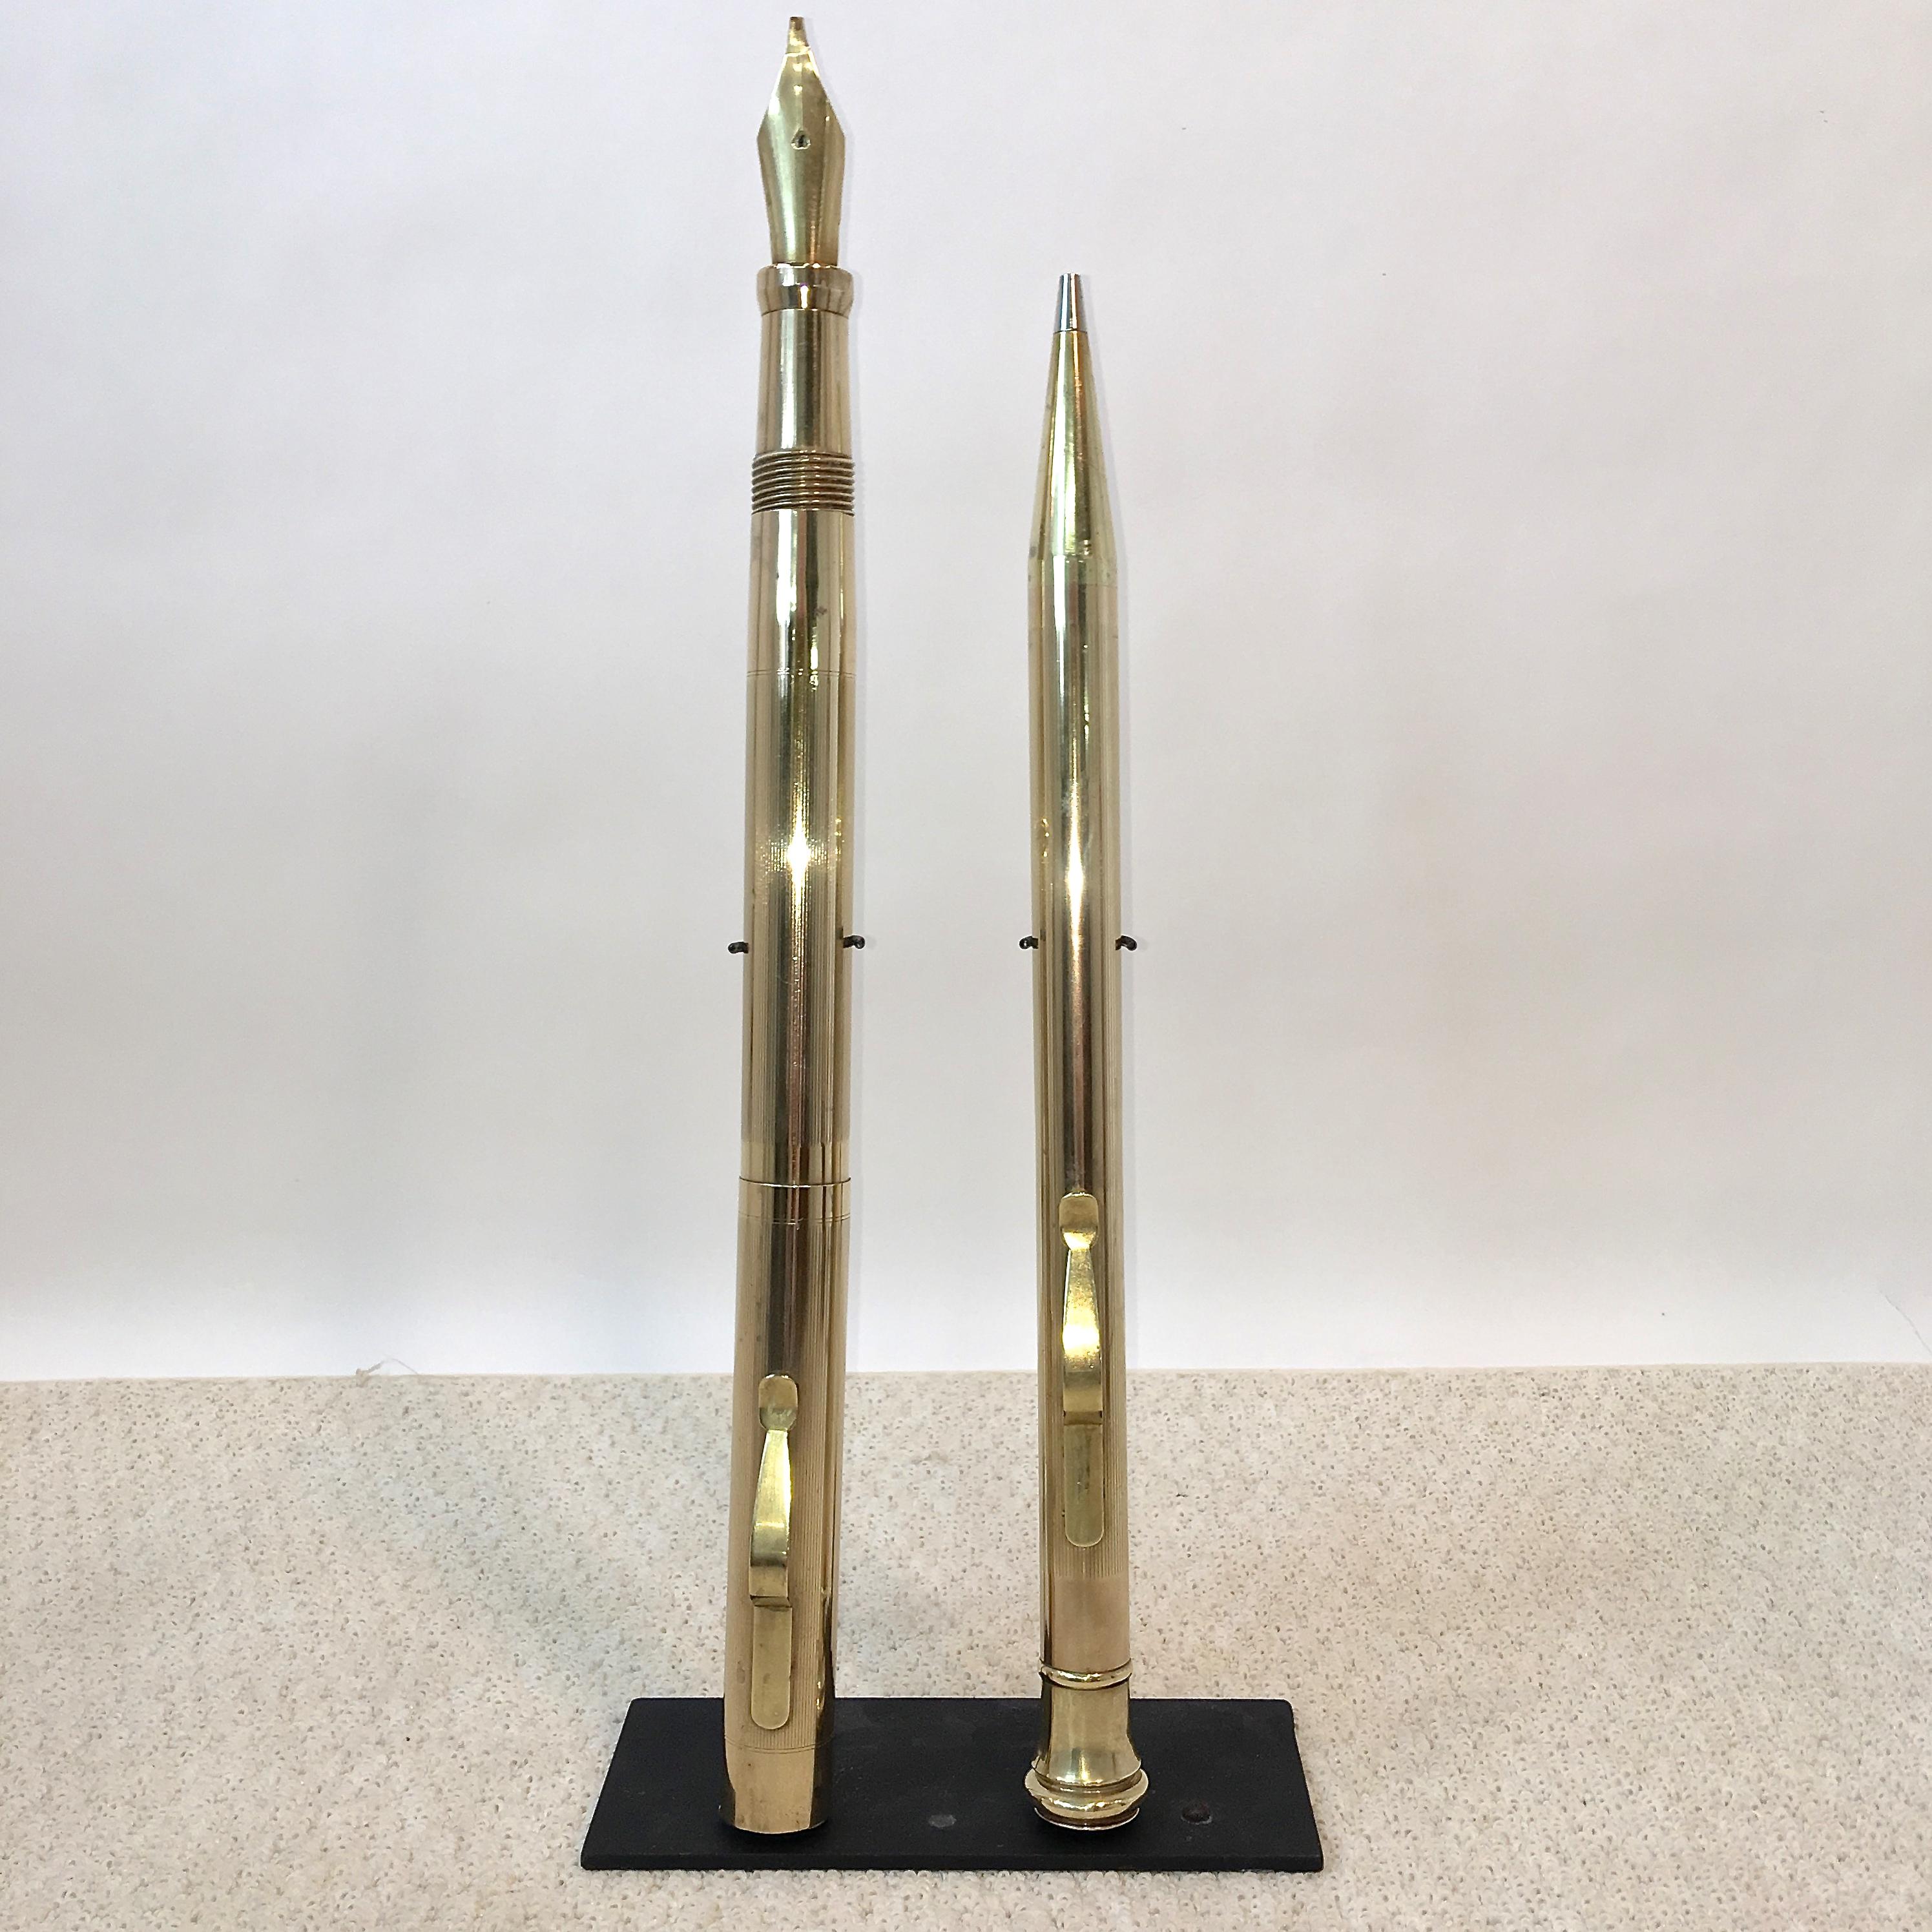 Giant Art Deco Brass Fountain Pen and Mechanical Pencil Display Models For Sale 6